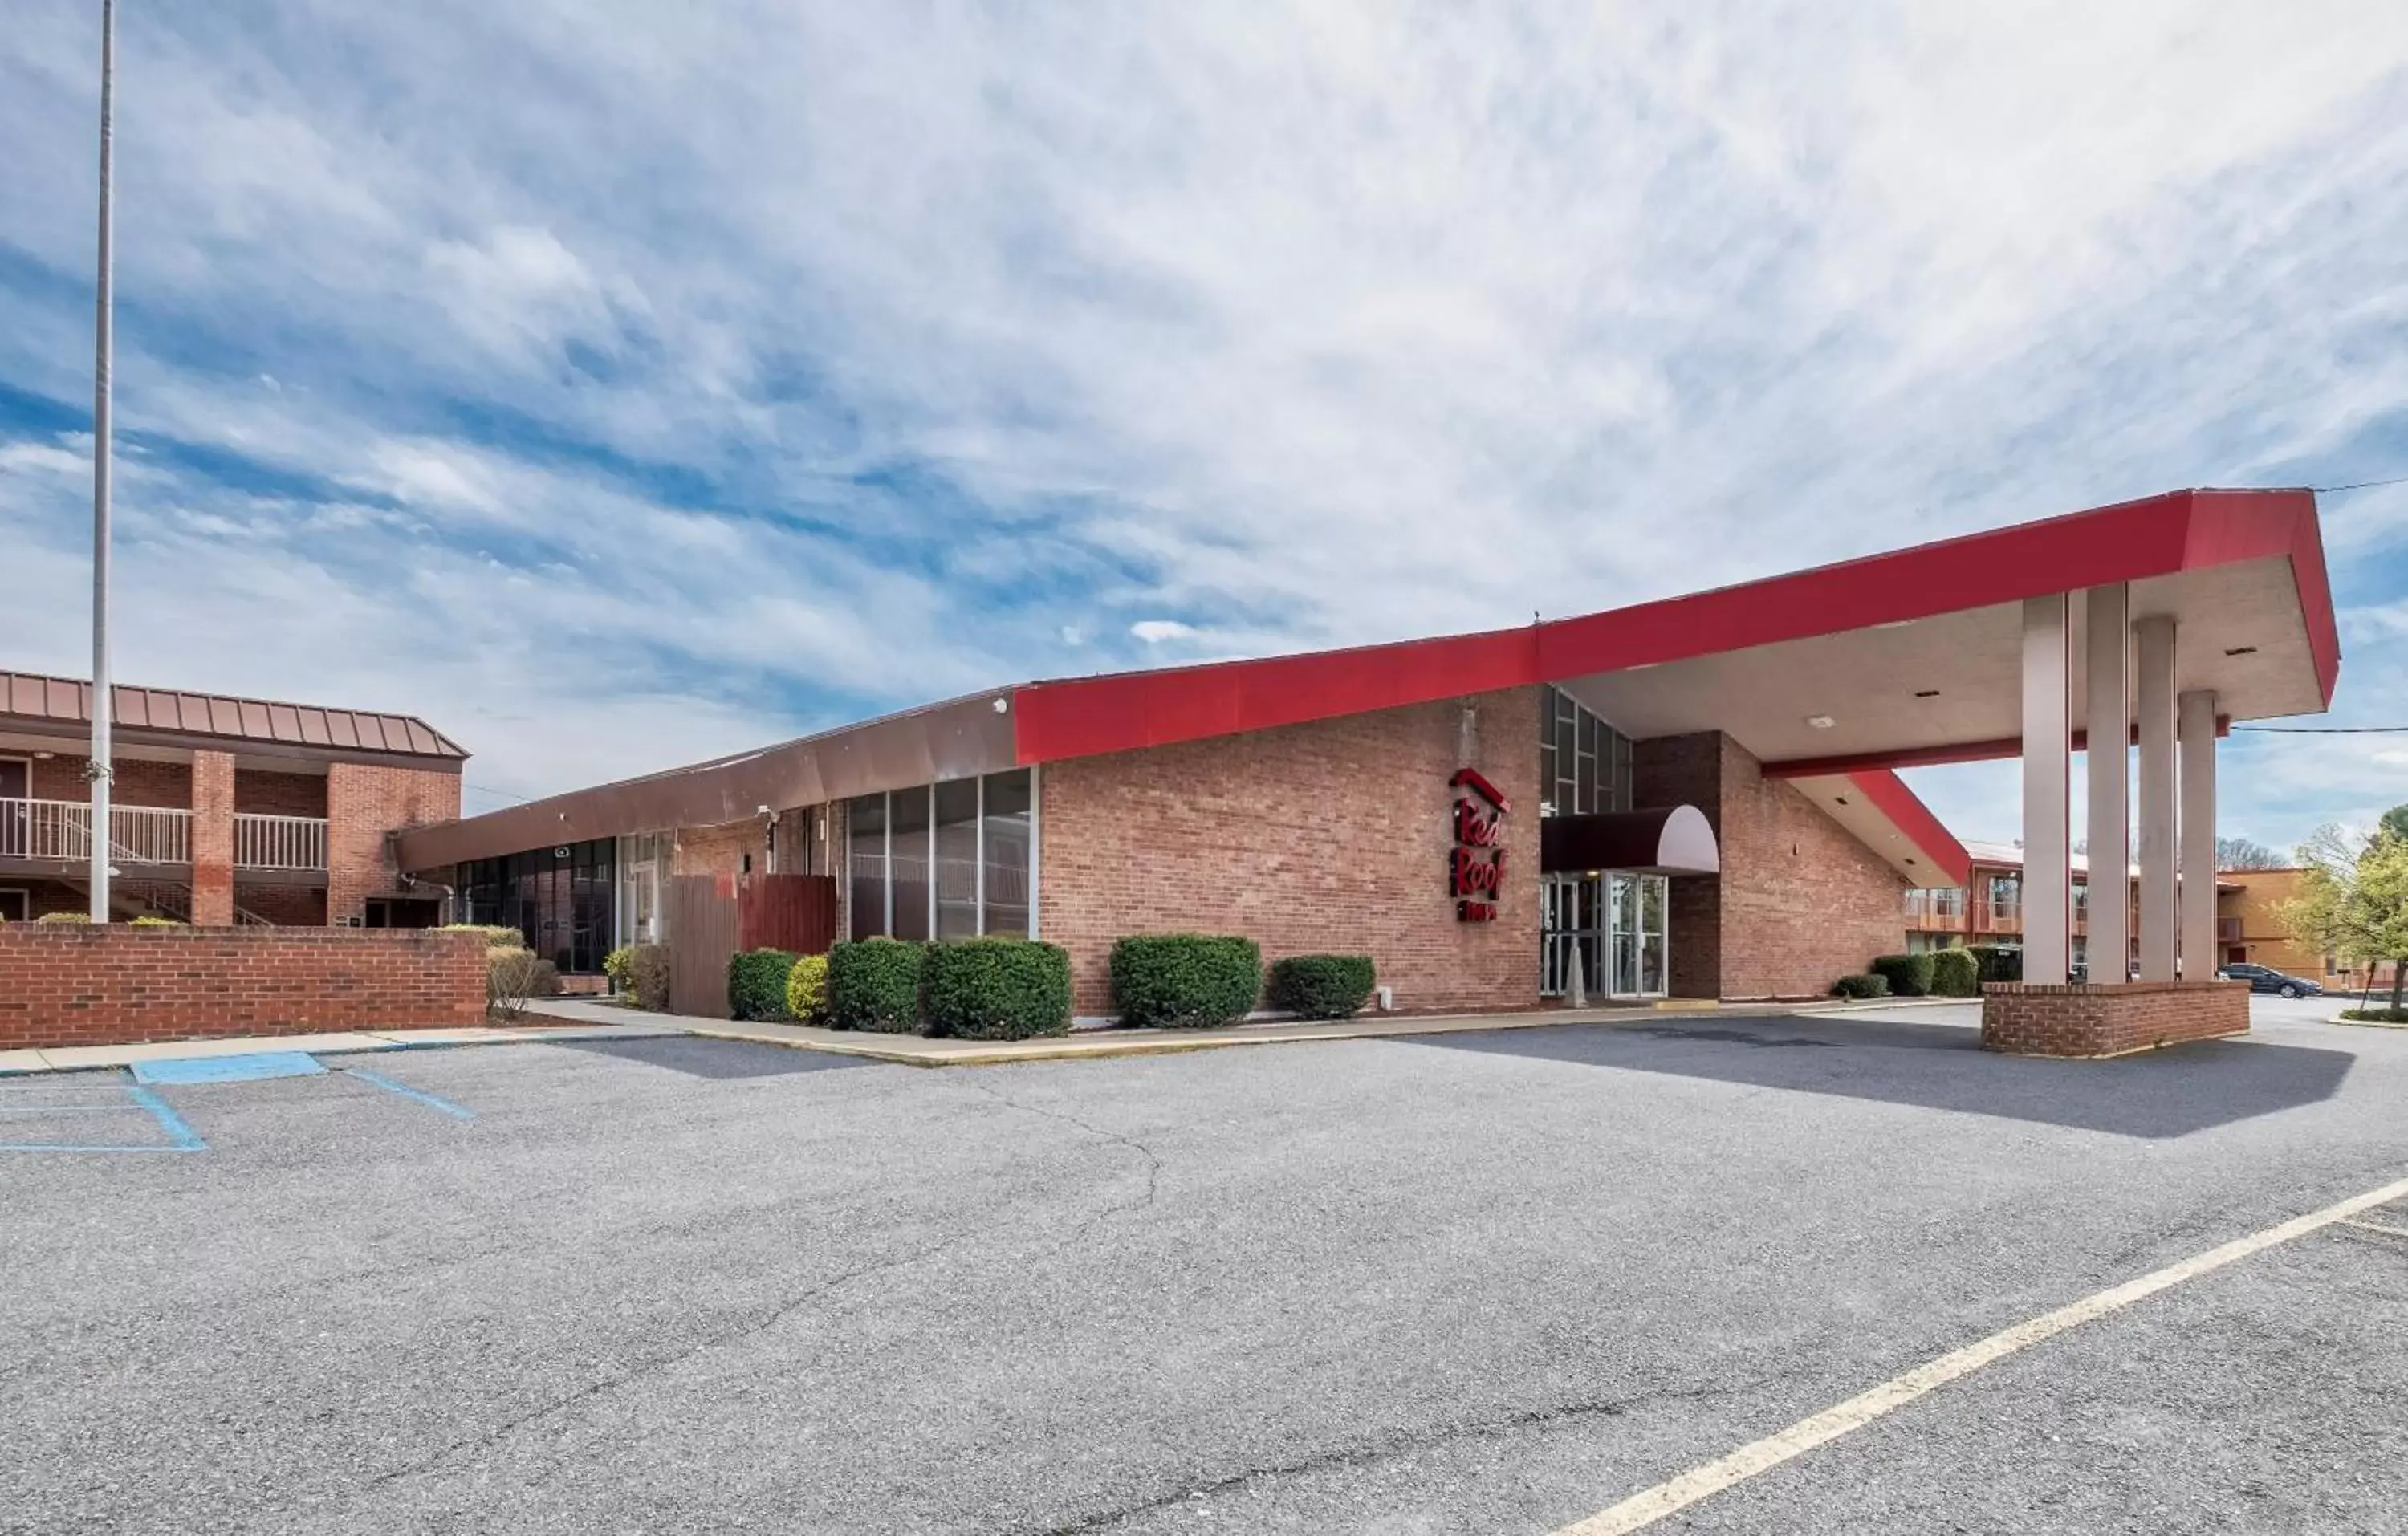 Property Building in Red Roof Inn Marion, VA